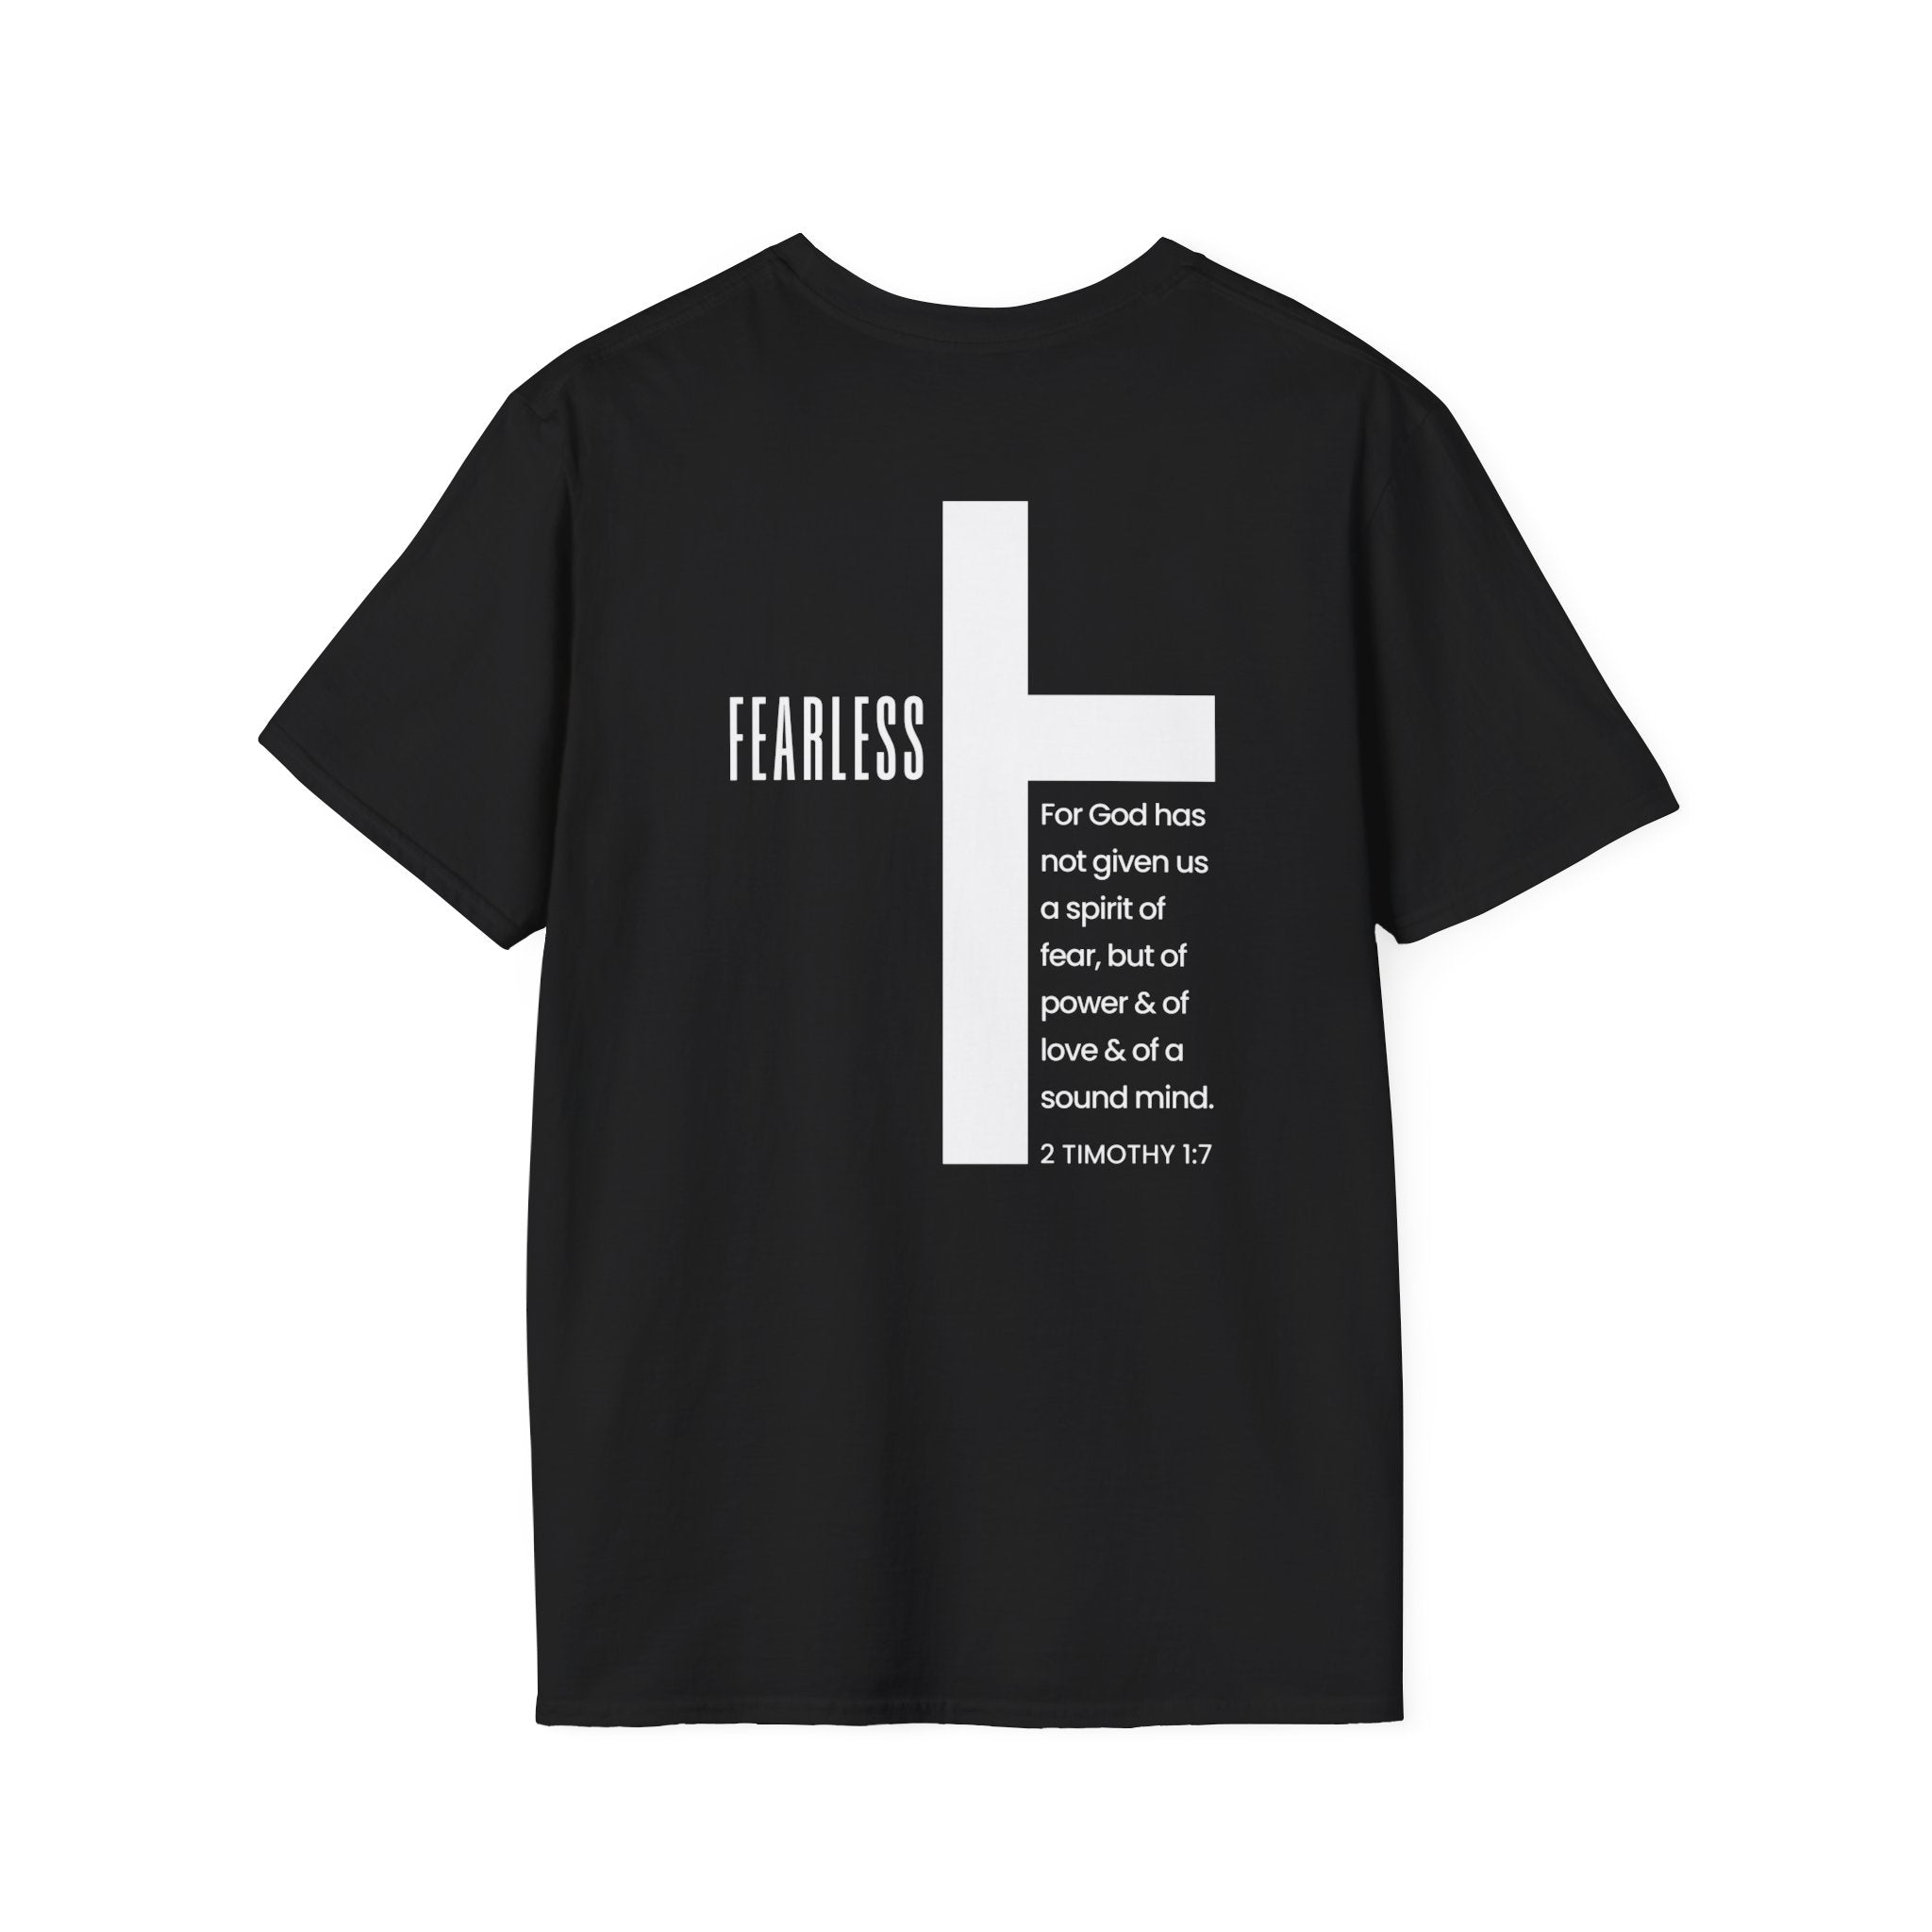 FEARLESS 2 Timothy 1:7 Unisex T-Shirt